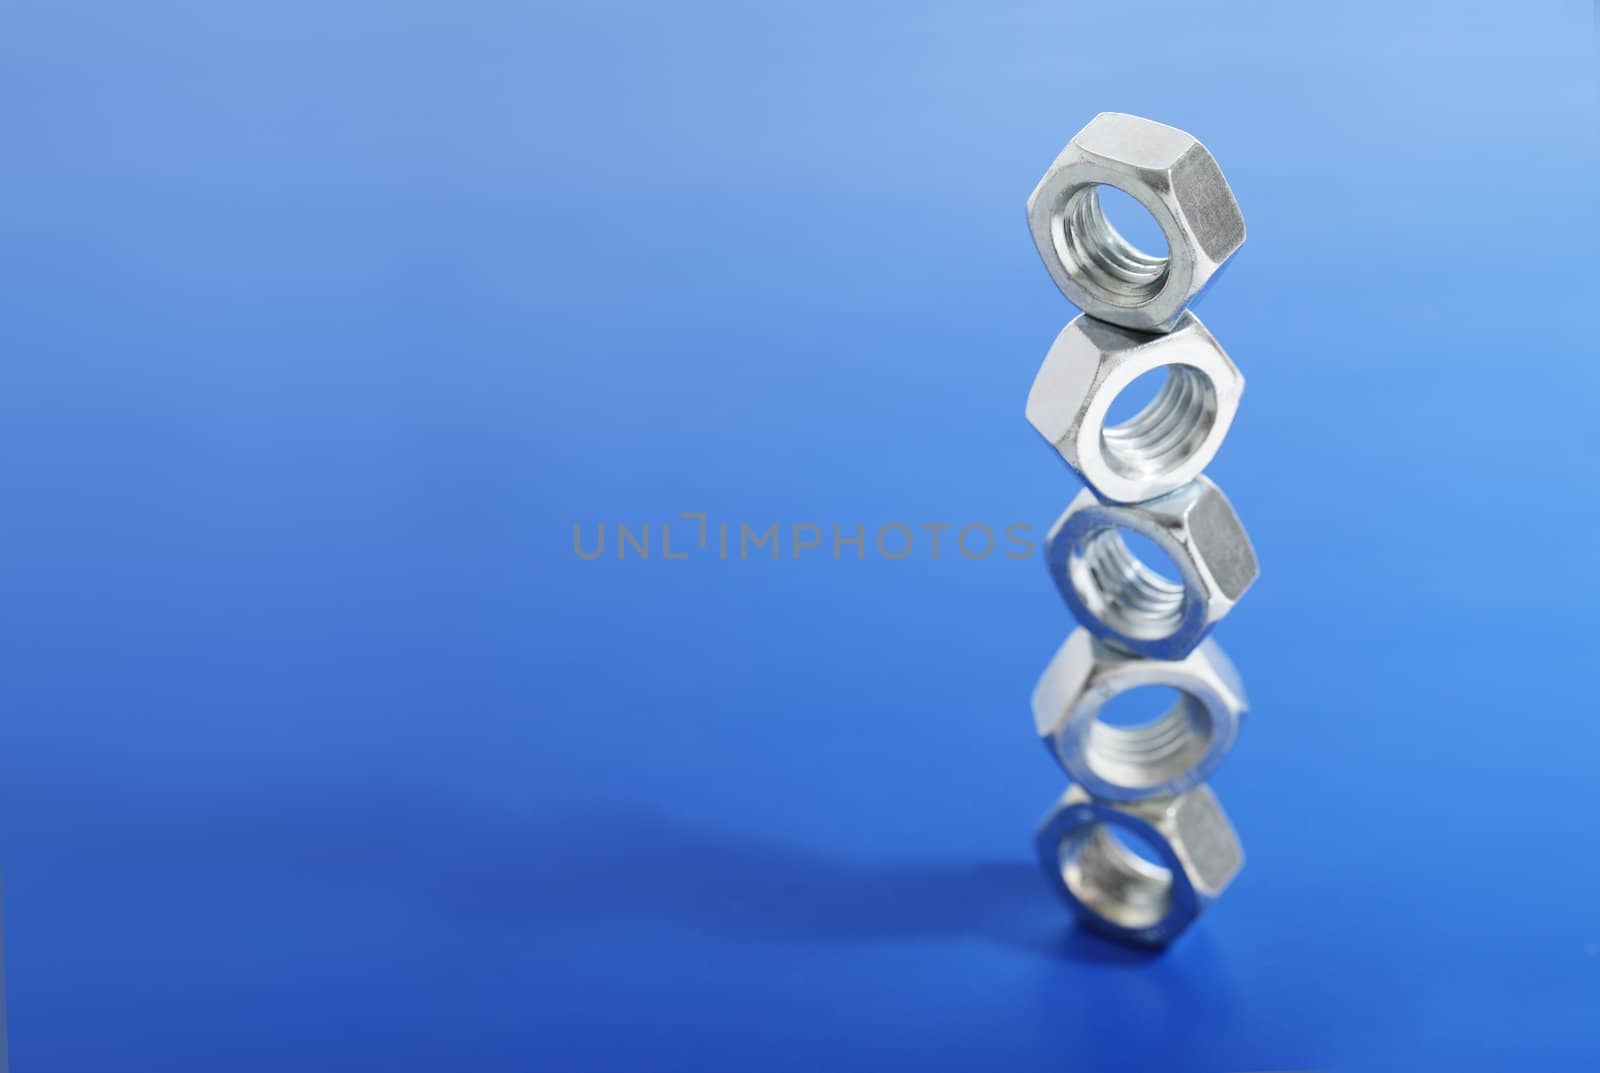 Steel nuts stacked on blue background.